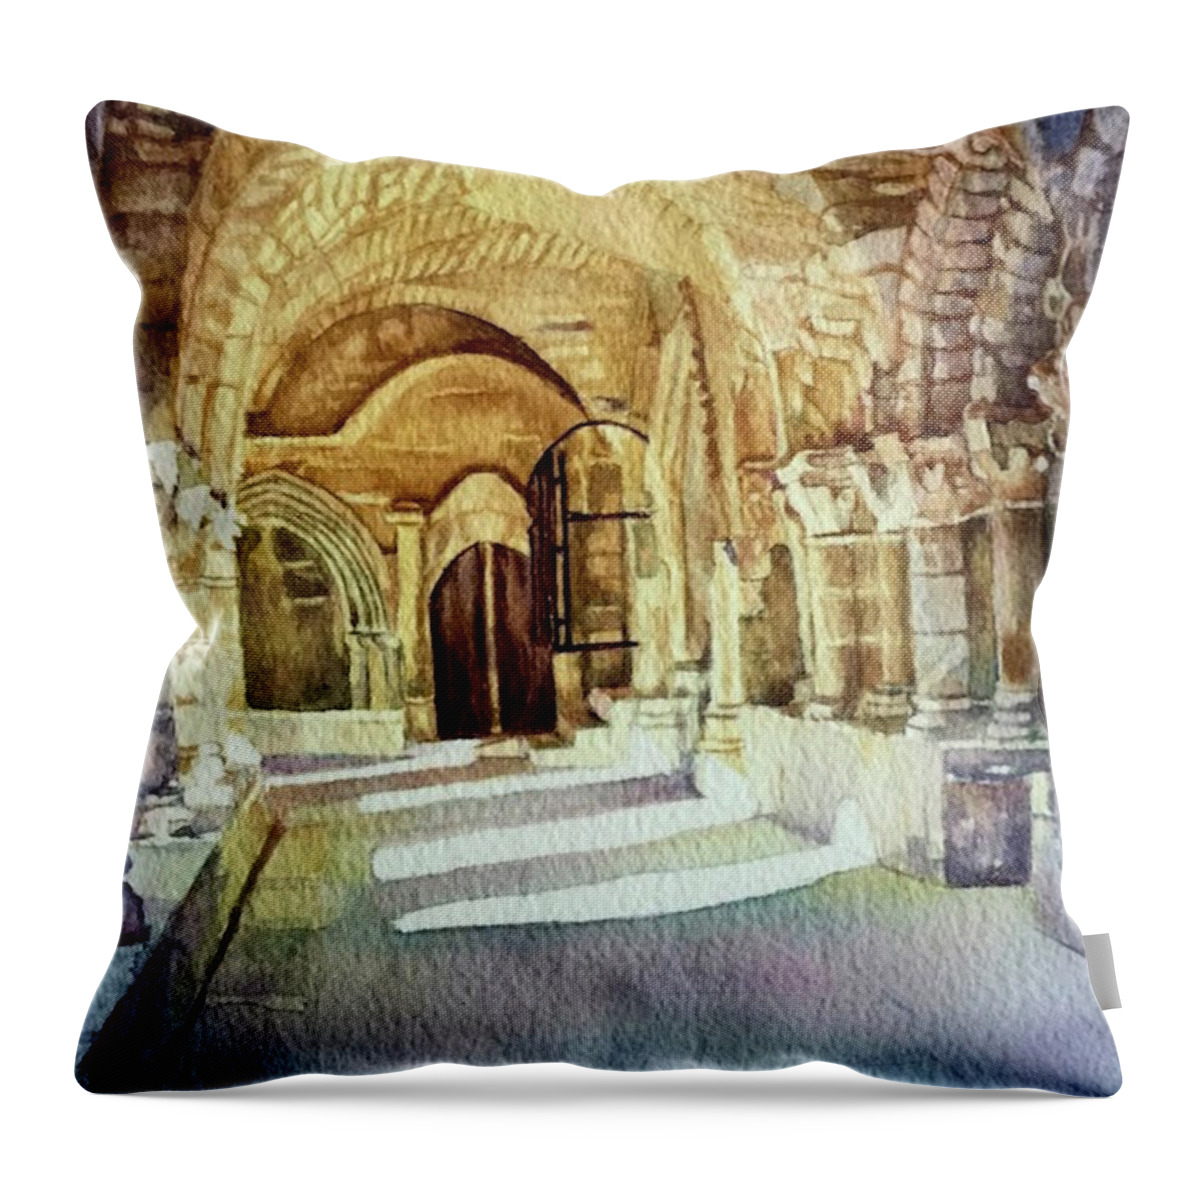 Cloitre Throw Pillow featuring the painting Le Cloitre by Francoise Chauray